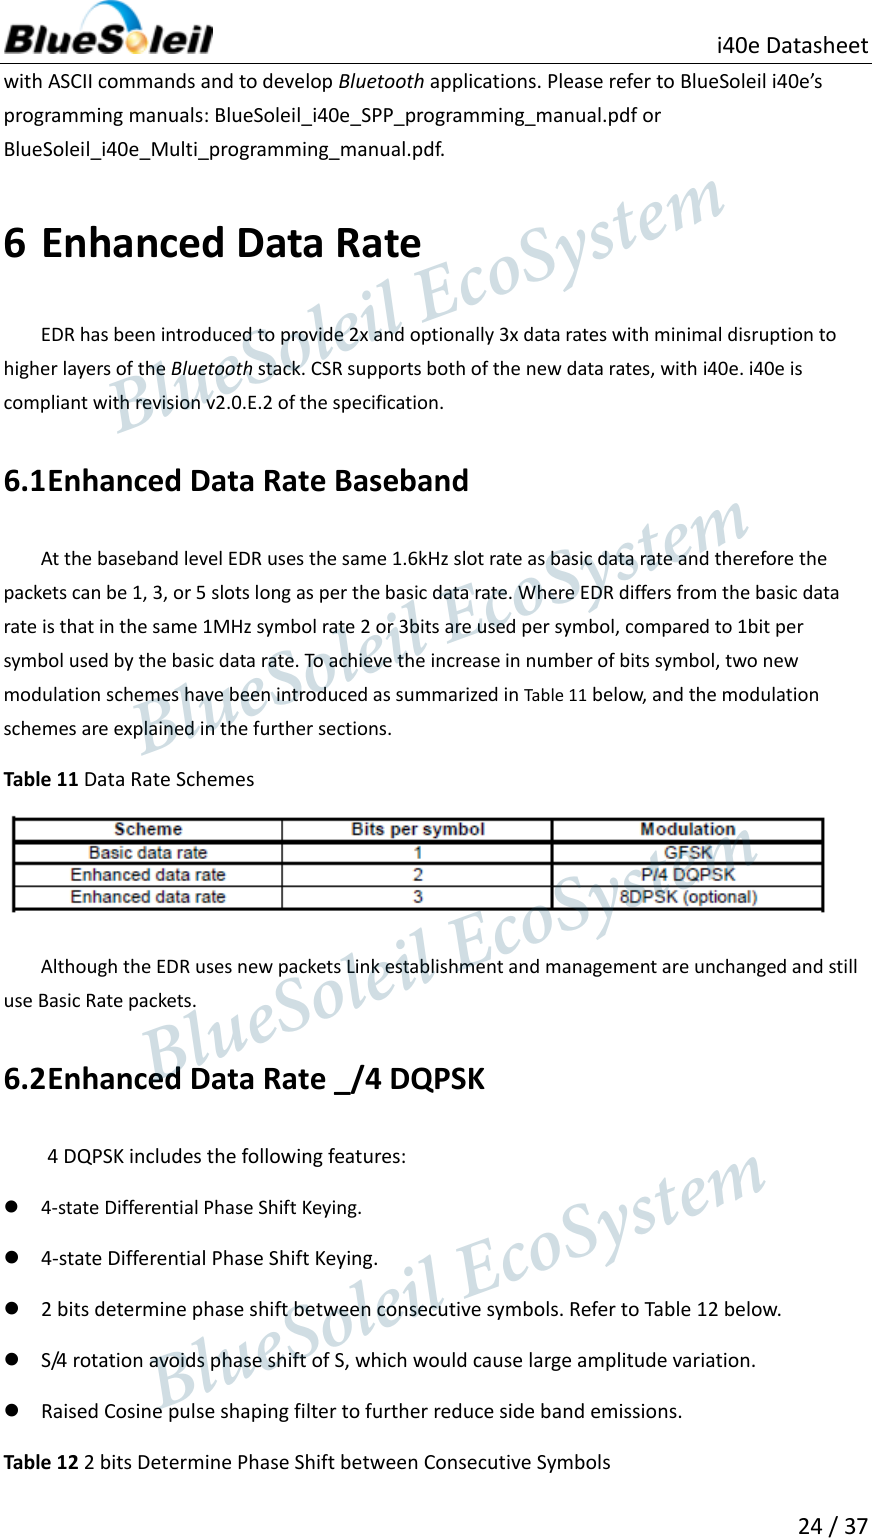                          i40e Datasheet  24 / 37  with ASCII commands and to develop Bluetooth applications. Please refer to BlueSoleil i40e’s programming manuals: BlueSoleil_i40e_SPP_programming_manual.pdf or BlueSoleil_i40e_Multi_programming_manual.pdf. 6 Enhanced Data Rate EDR has been introduced to provide 2x and optionally 3x data rates with minimal disruption to higher layers of the Bluetooth stack. CSR supports both of the new data rates, with i40e. i40e is compliant with revision v2.0.E.2 of the specification. 6.1 Enhanced Data Rate Baseband At the baseband level EDR uses the same 1.6kHz slot rate as basic data rate and therefore the packets can be 1, 3, or 5 slots long as per the basic data rate. Where EDR differs from the basic data rate is that in the same 1MHz symbol rate 2 or 3bits are used per symbol, compared to 1bit per symbol used by the basic data rate. To achieve the increase in number of bits symbol, two new modulation schemes have been introduced as summarized in Table 11 below, and the modulation schemes are explained in the further sections. Table 11 Data Rate Schemes  Although the EDR uses new packets Link establishment and management are unchanged and still use Basic Rate packets. 6.2 Enhanced Data Rate _/4 DQPSK 4 DQPSK includes the following features:    4-state Differential Phase Shift Keying.  4-state Differential Phase Shift Keying.  2 bits determine phase shift between consecutive symbols. Refer to Table 12 below.  S/4 rotation avoids phase shift of S, which would cause large amplitude variation.  Raised Cosine pulse shaping filter to further reduce side band emissions. Table 12 2 bits Determine Phase Shift between Consecutive Symbols                  BlueSoleil EcoSystem            BlueSoleil EcoSystem      BlueSoleil EcoSystemBlueSoleil EcoSystem